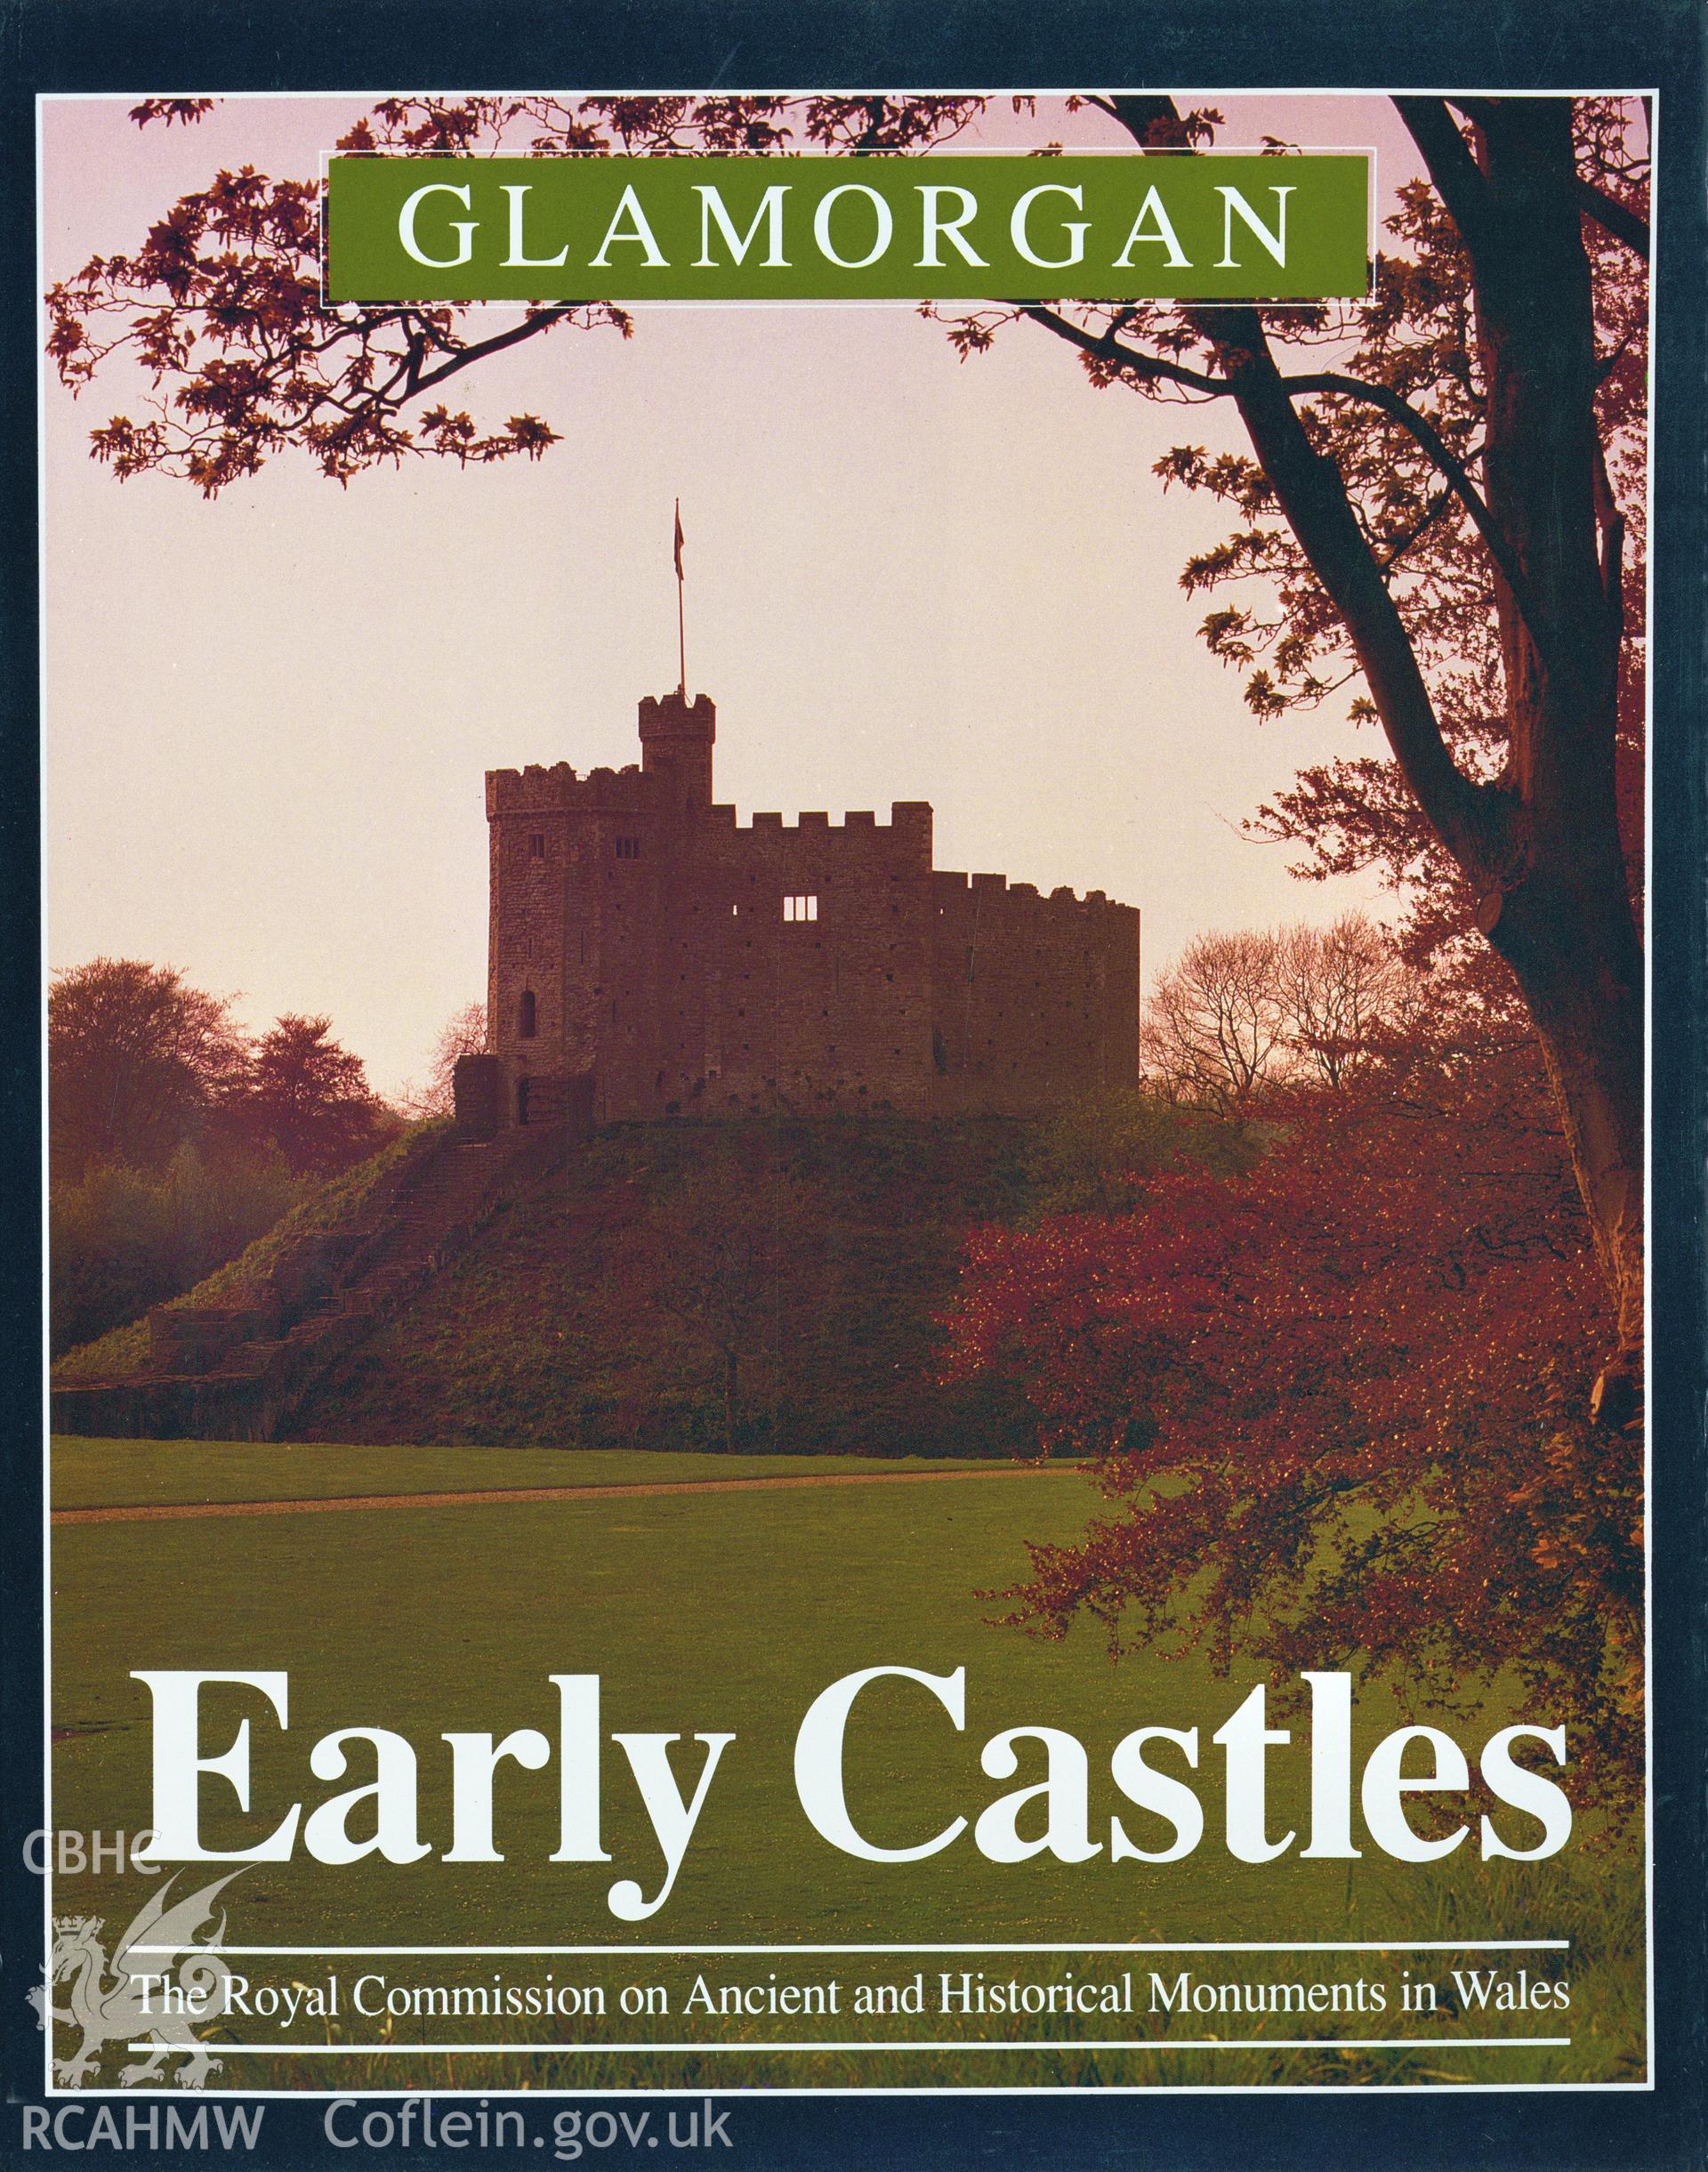 Colour transparency of the cover of the RCAHMW Publication of Early Castles of Glamorgan.